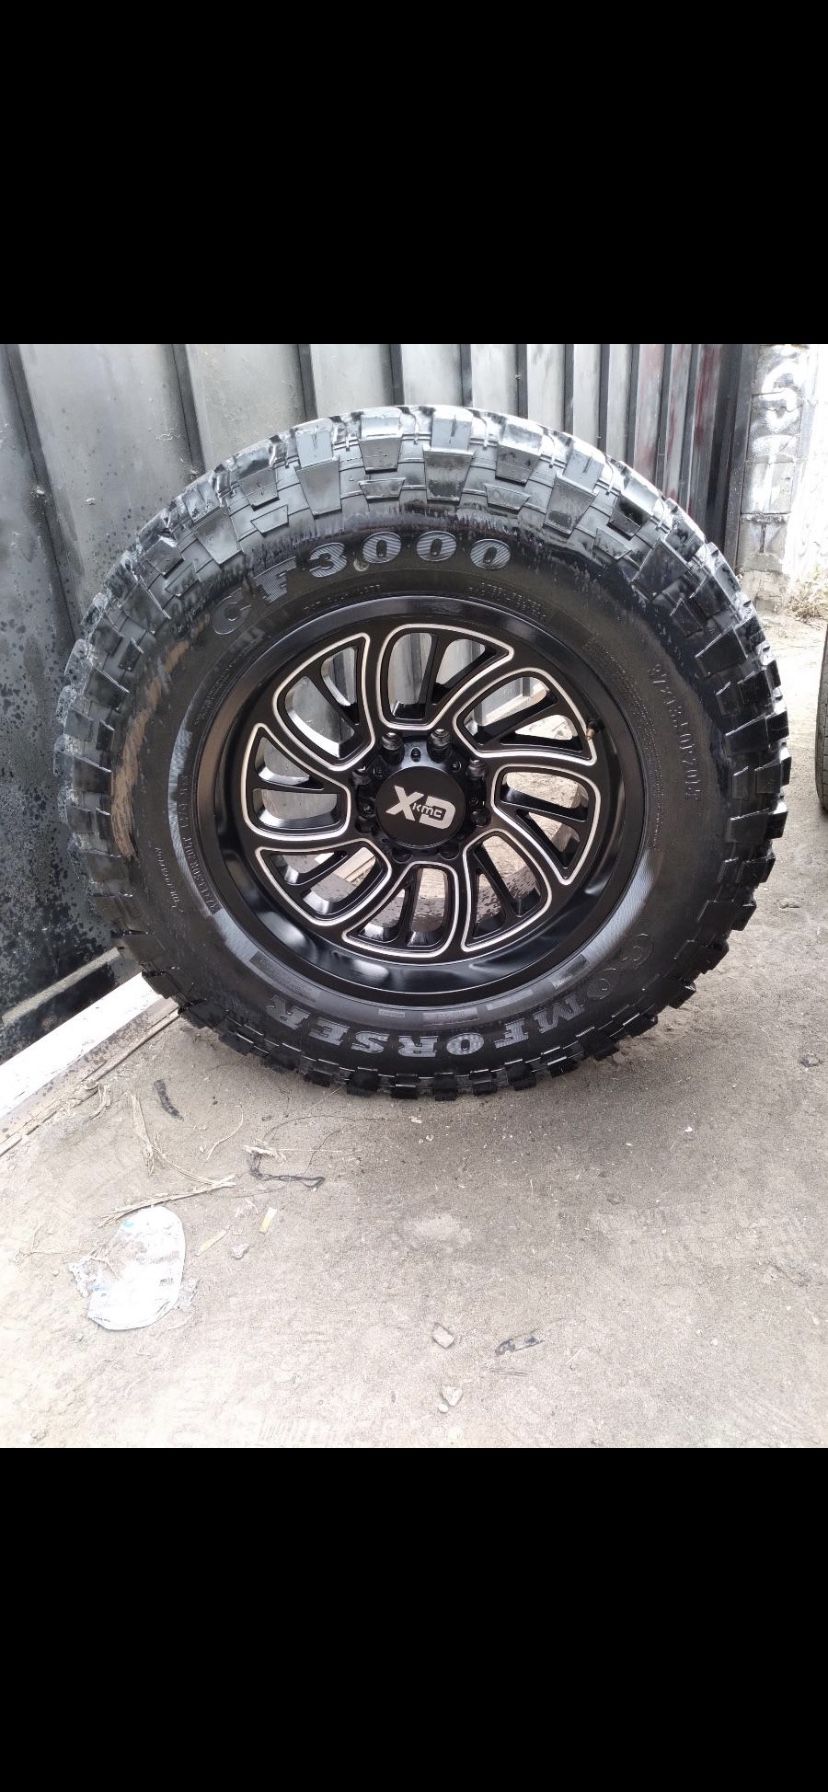 20 inch wheels. 20 x12s 37 x13.50x20s tires. Fits Ford. 8 lug. 1200 obo. Tires are about 60%.